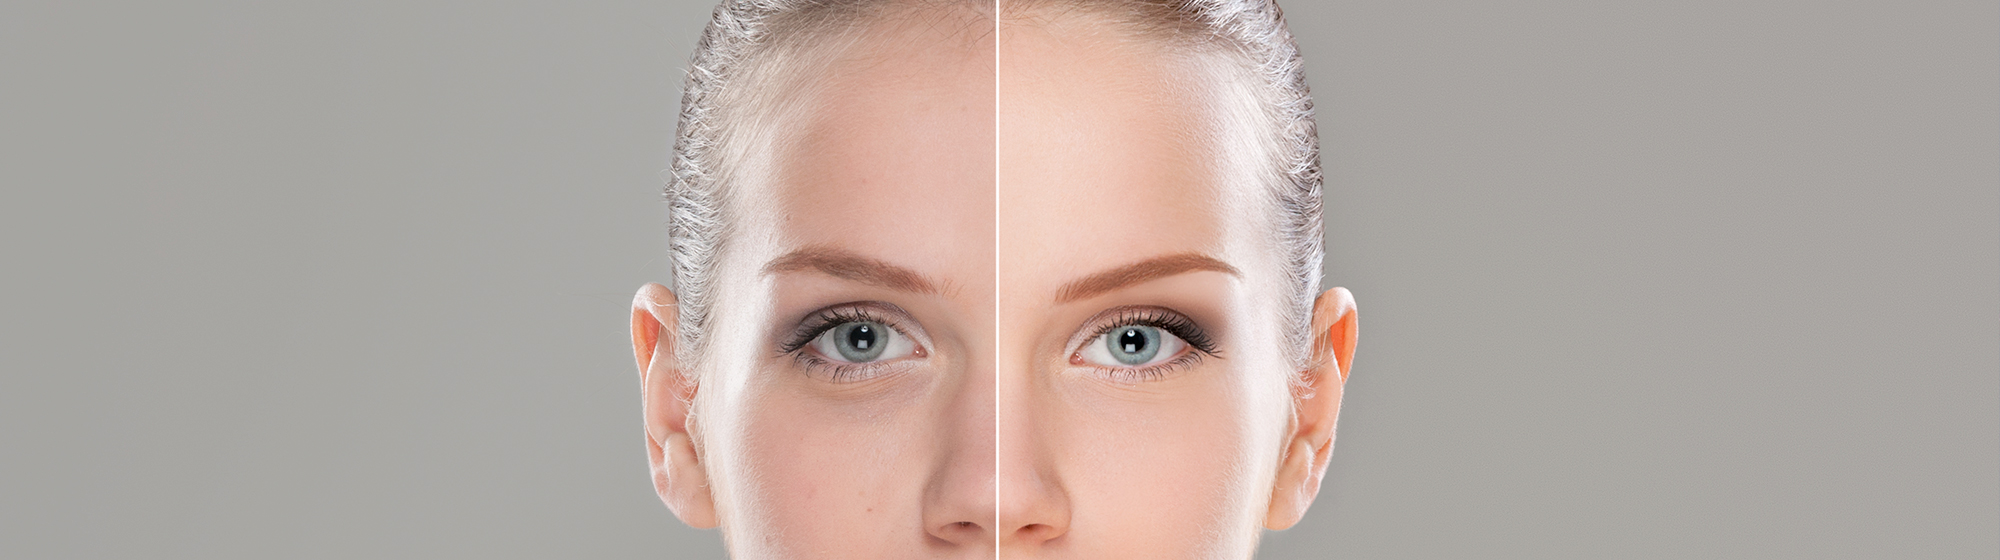 Dermal Fillers and Injectables Before & After Photos in Tampa Bay, FL